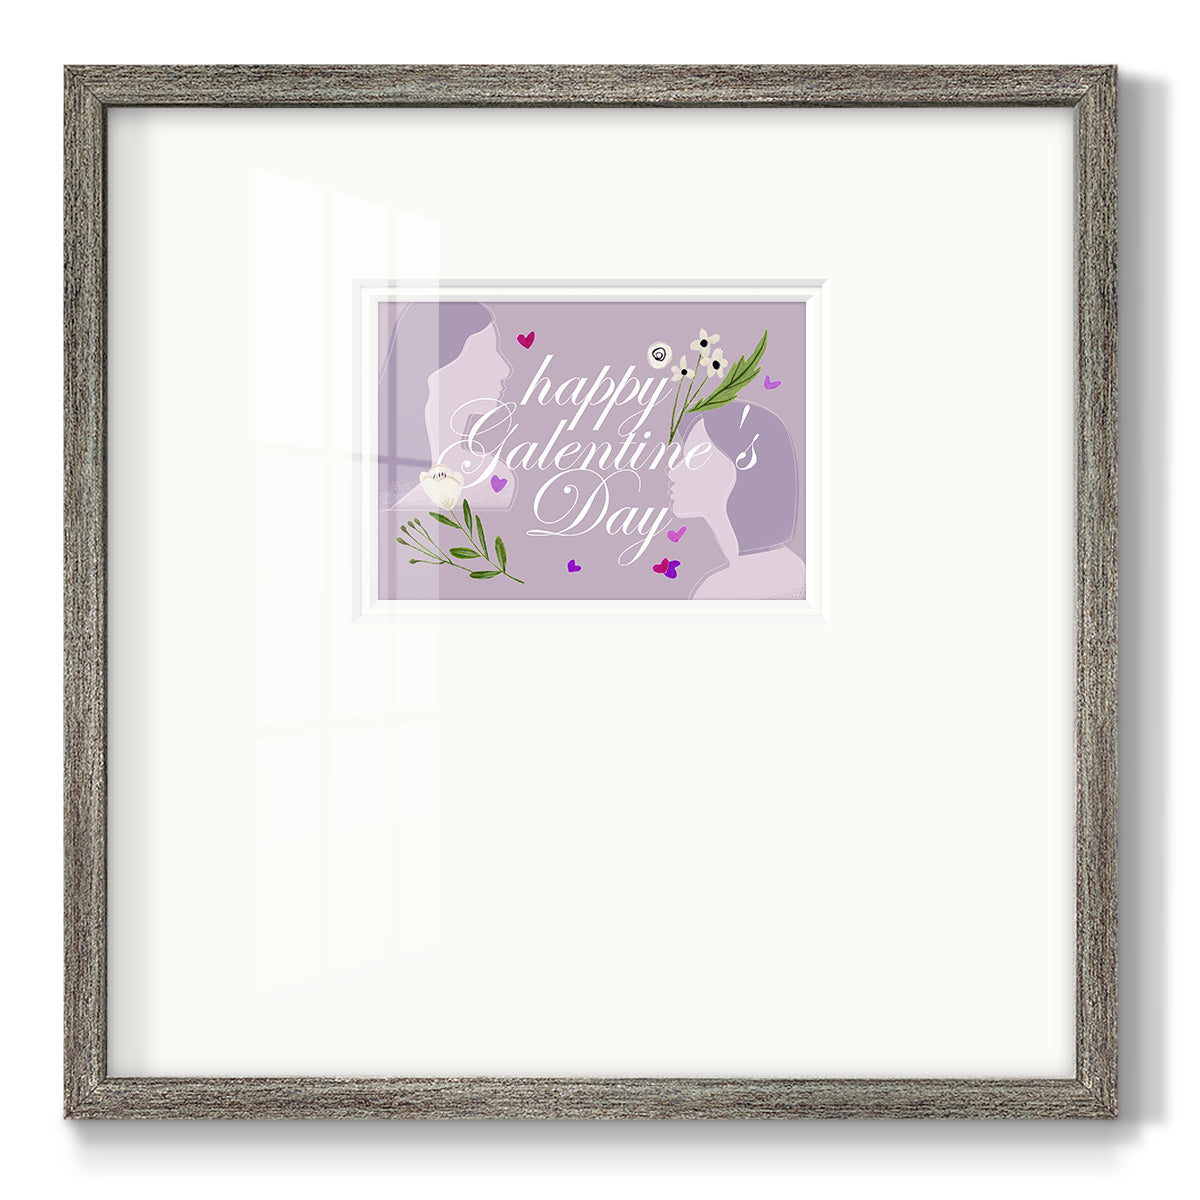 Happy Galentine's Day Collection A Premium Framed Print Double Matboard